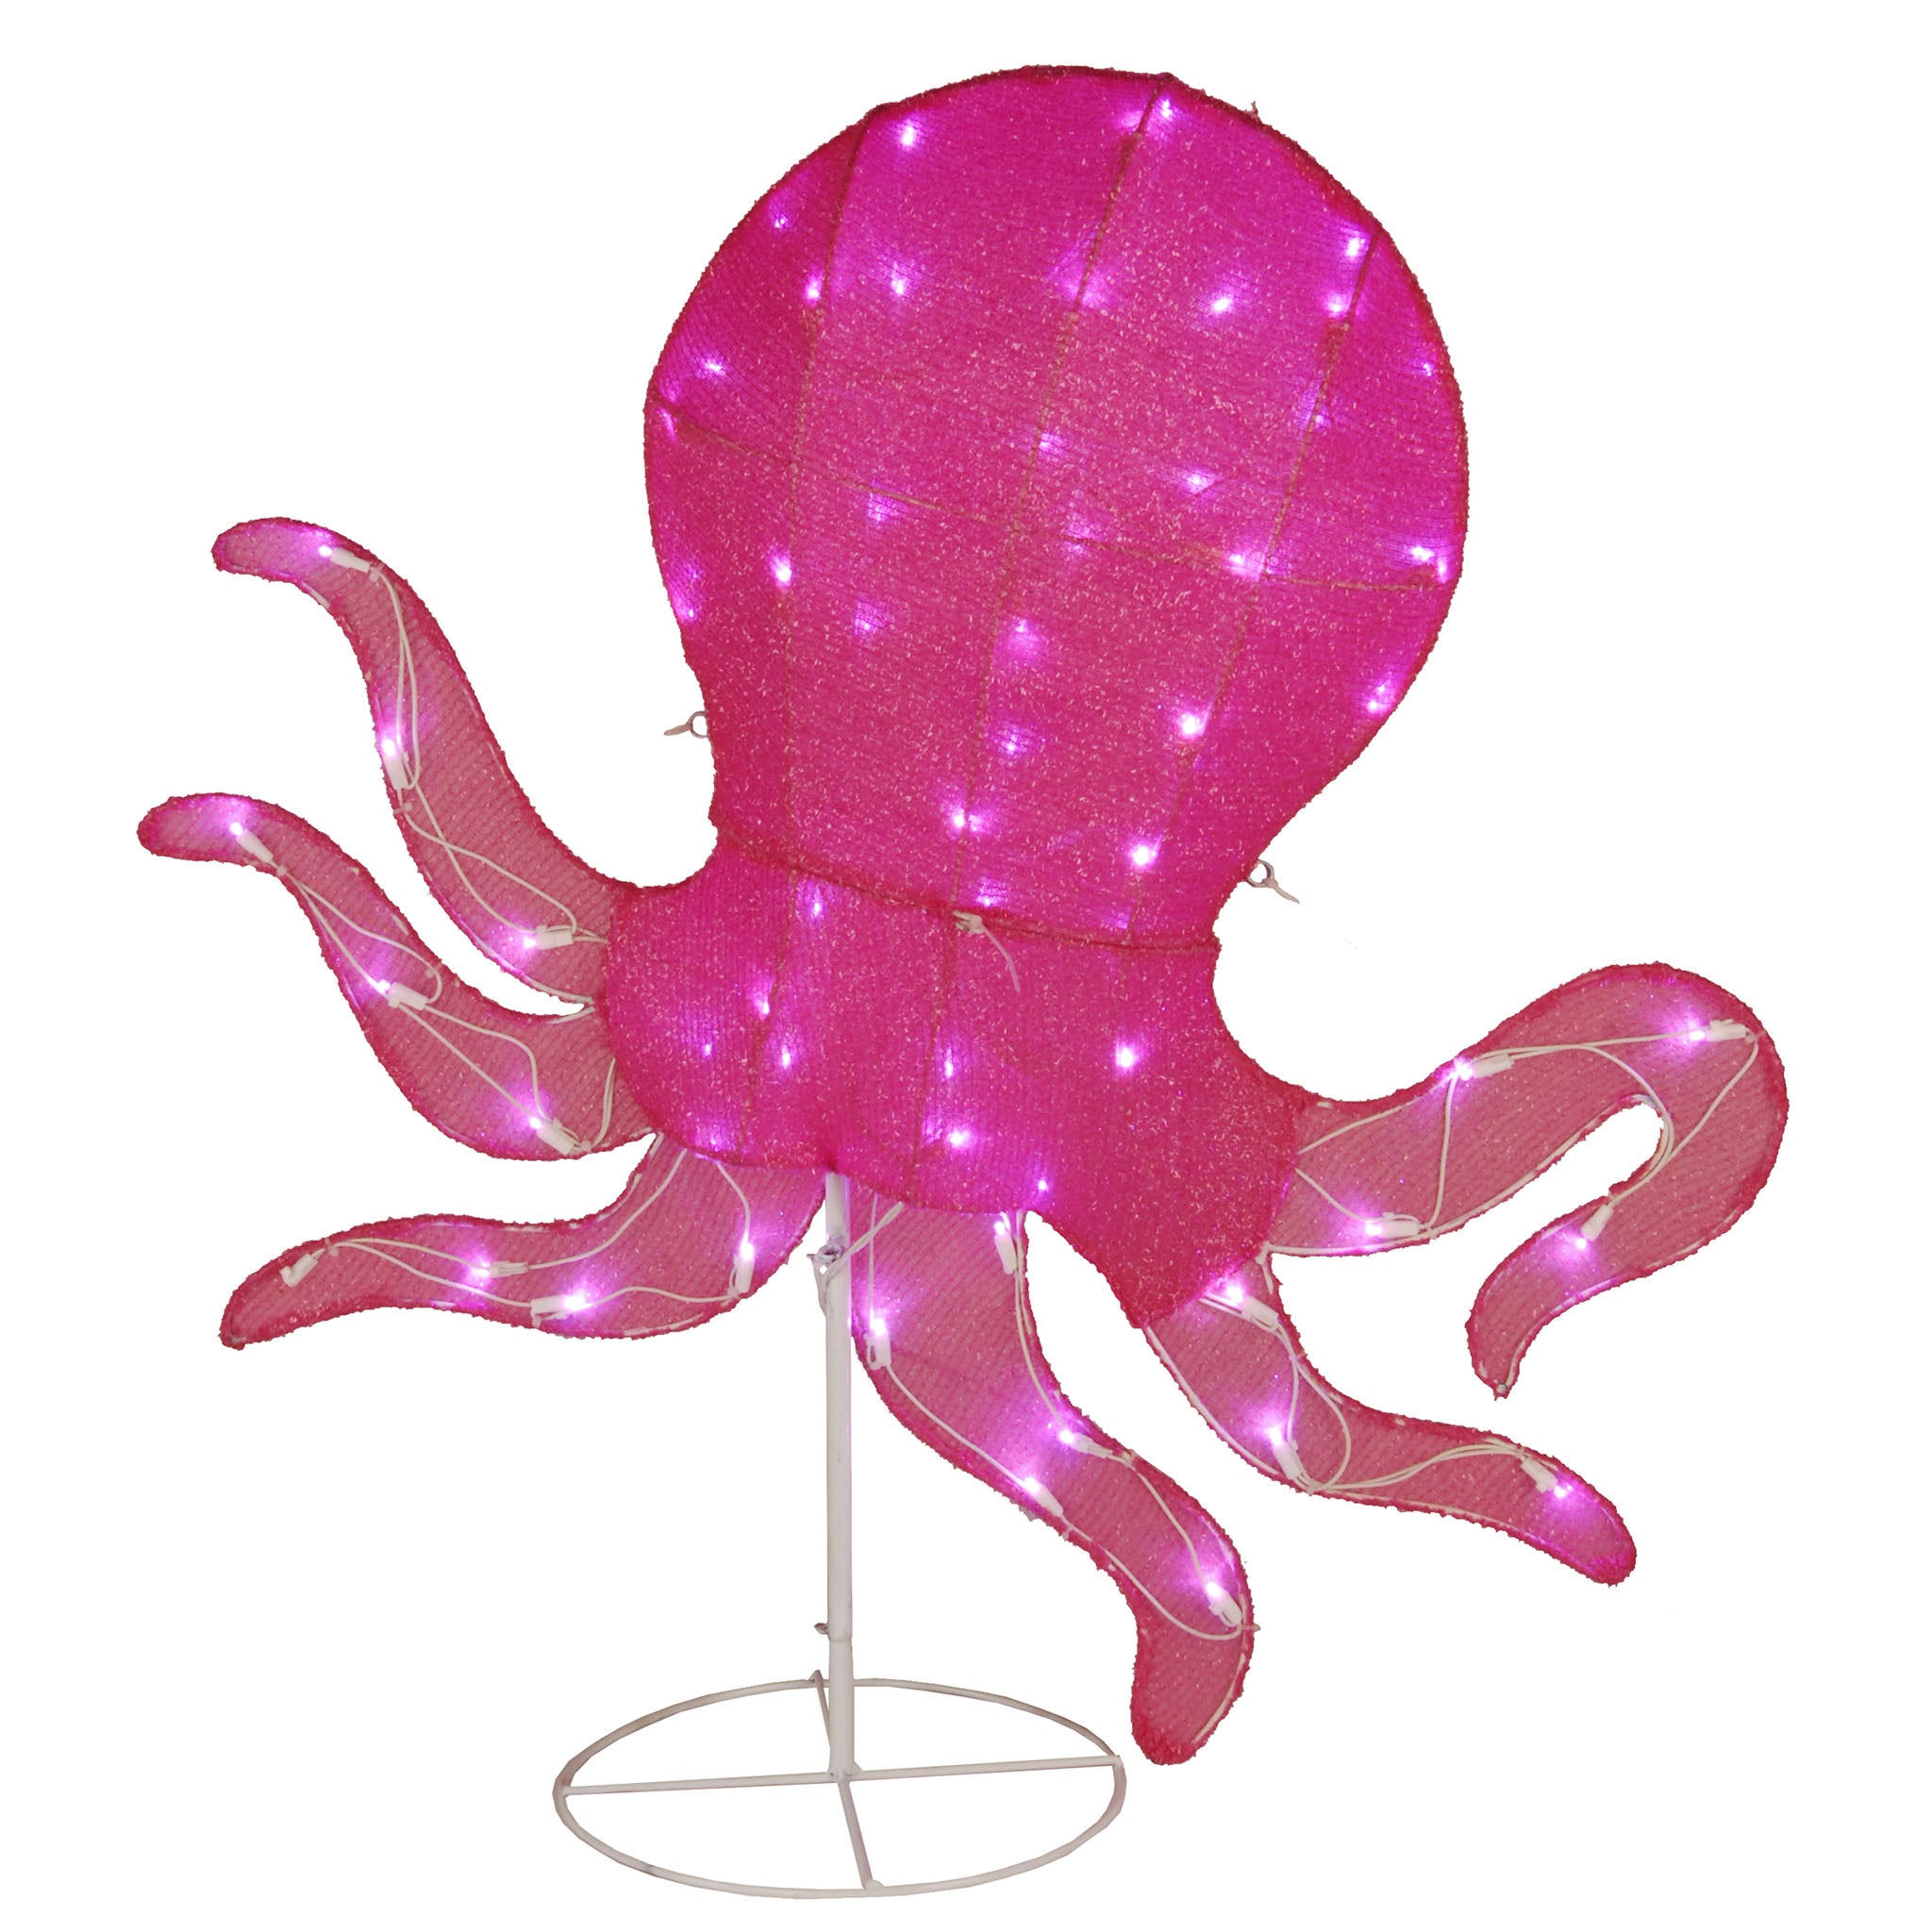 National Tree Company Pre-Lit Purple Smiling Octopus Outdoor Decoration, LED Lights, Plug In, Spring Collection, 36 Inches